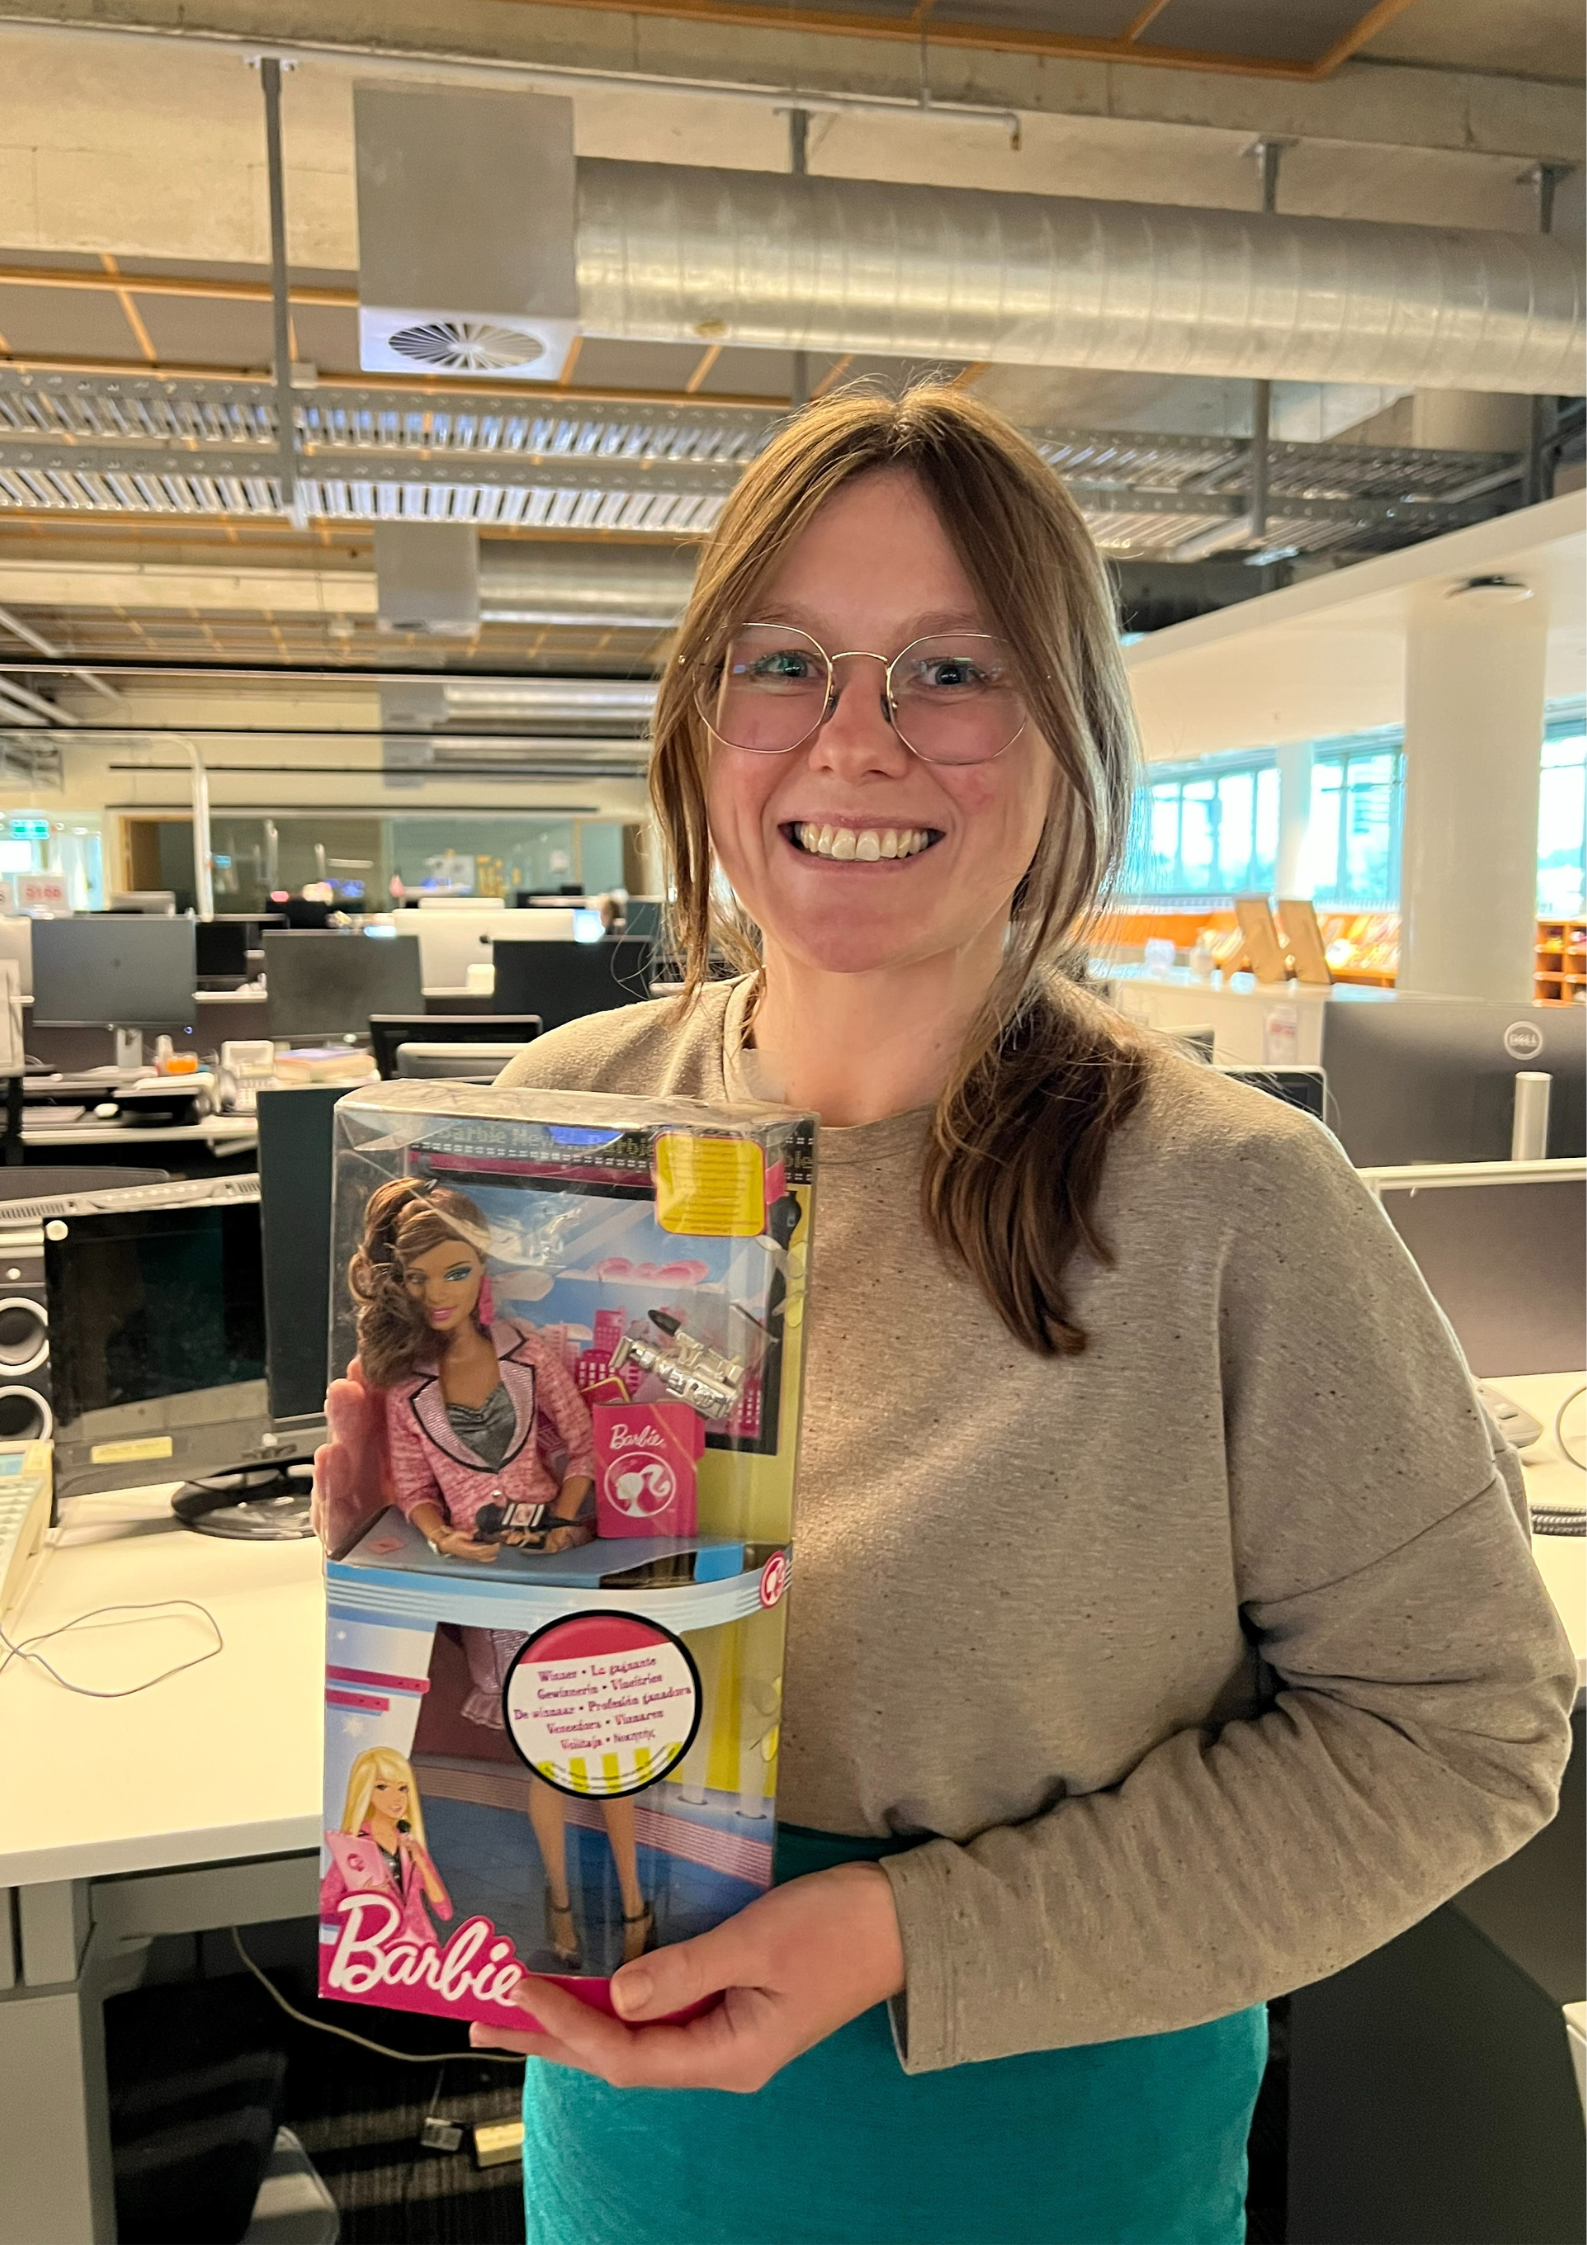 A woman holding up a Barbie doll inside its box